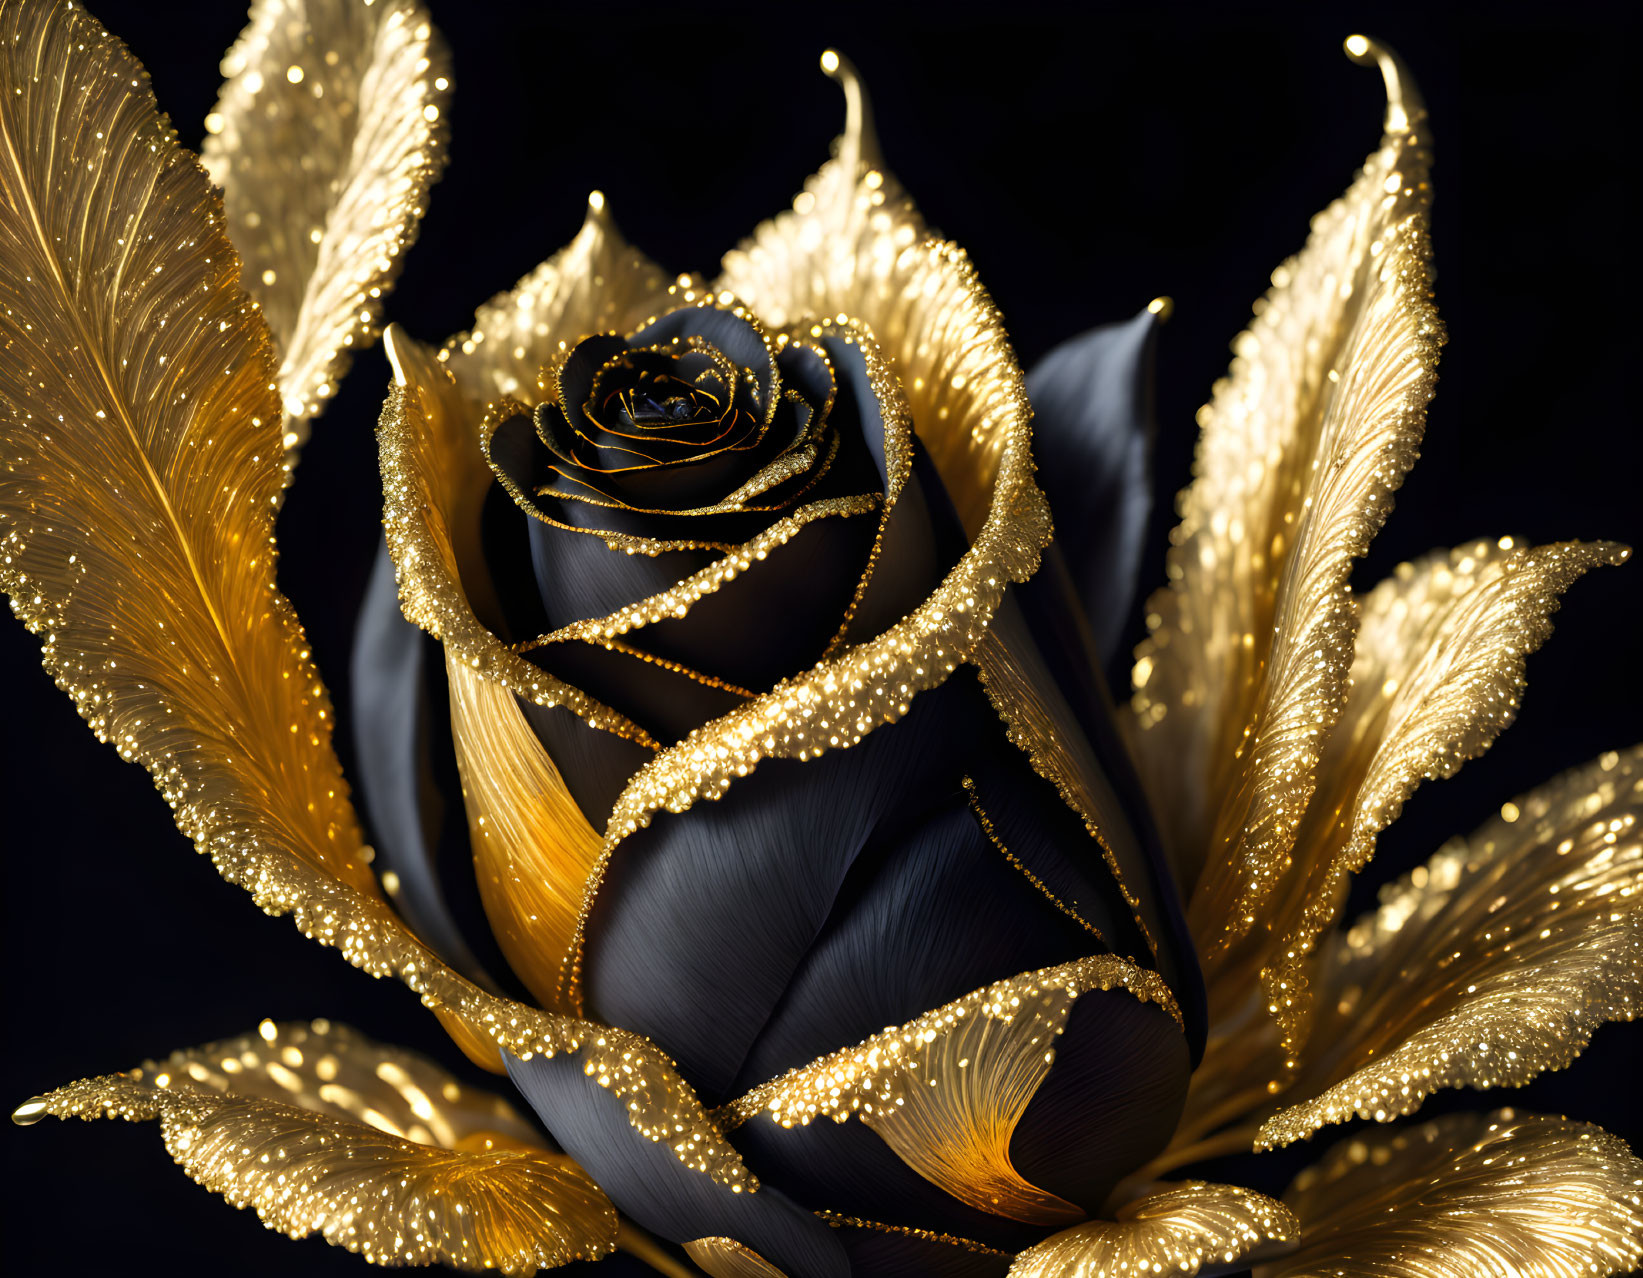 Black Rose Embroidered in Gold #000